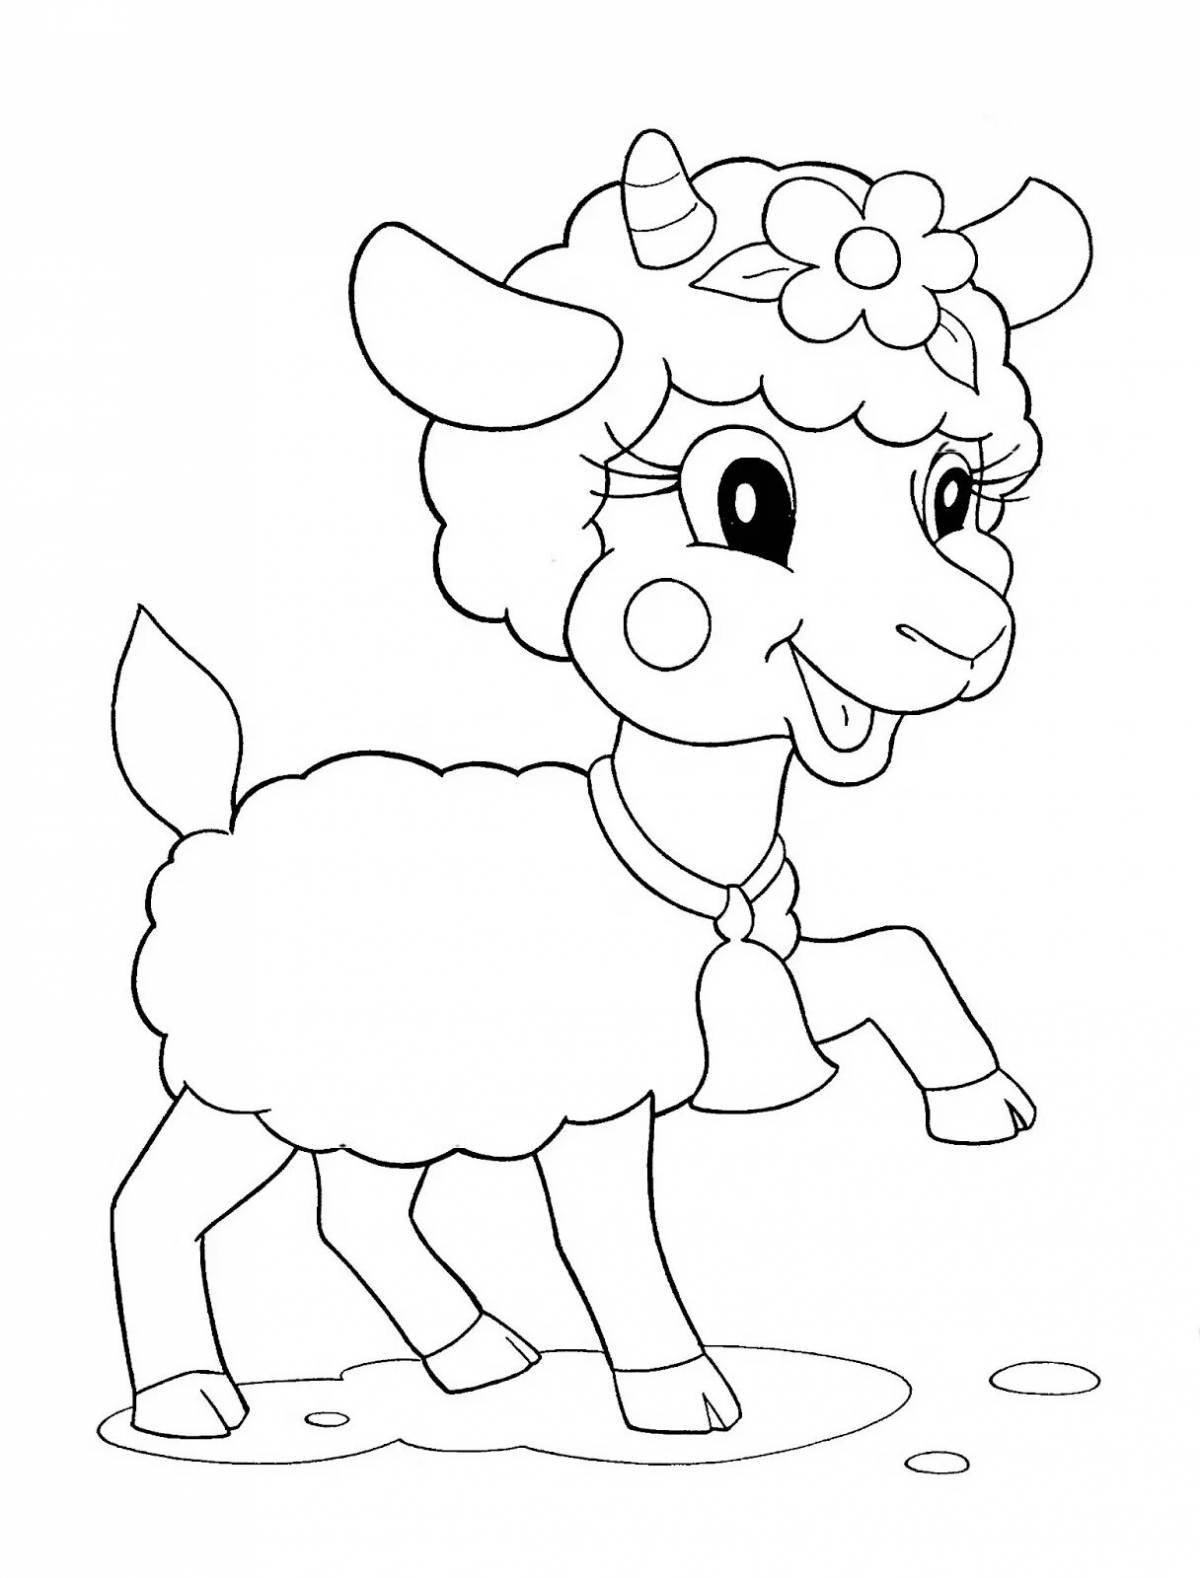 Colouring happy goat for kids